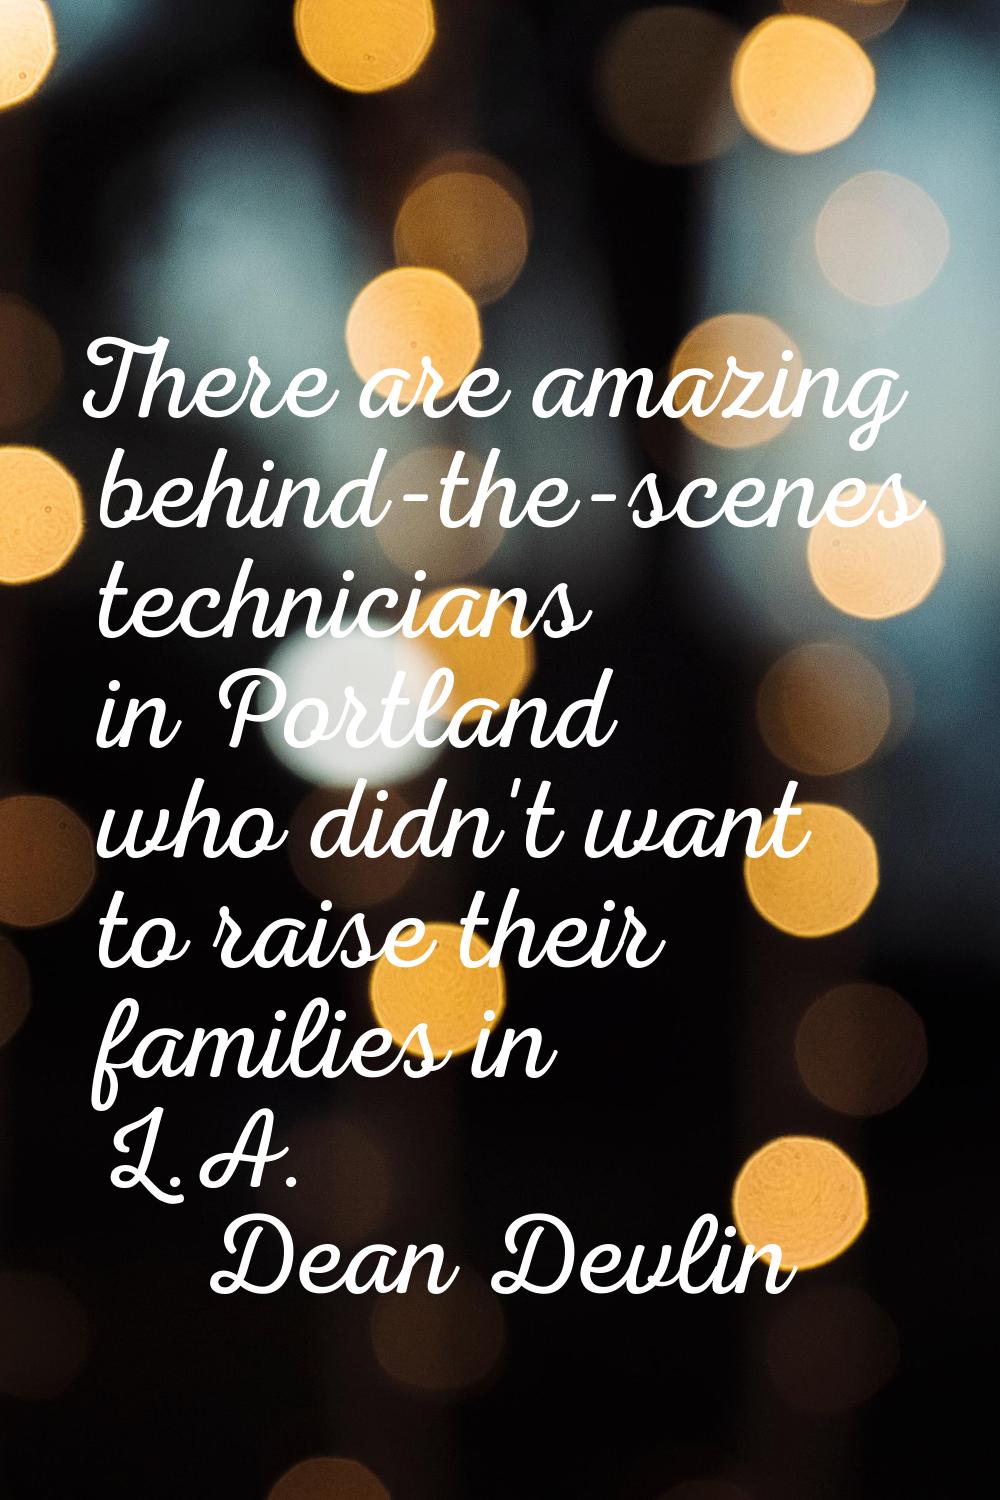 There are amazing behind-the-scenes technicians in Portland who didn't want to raise their families